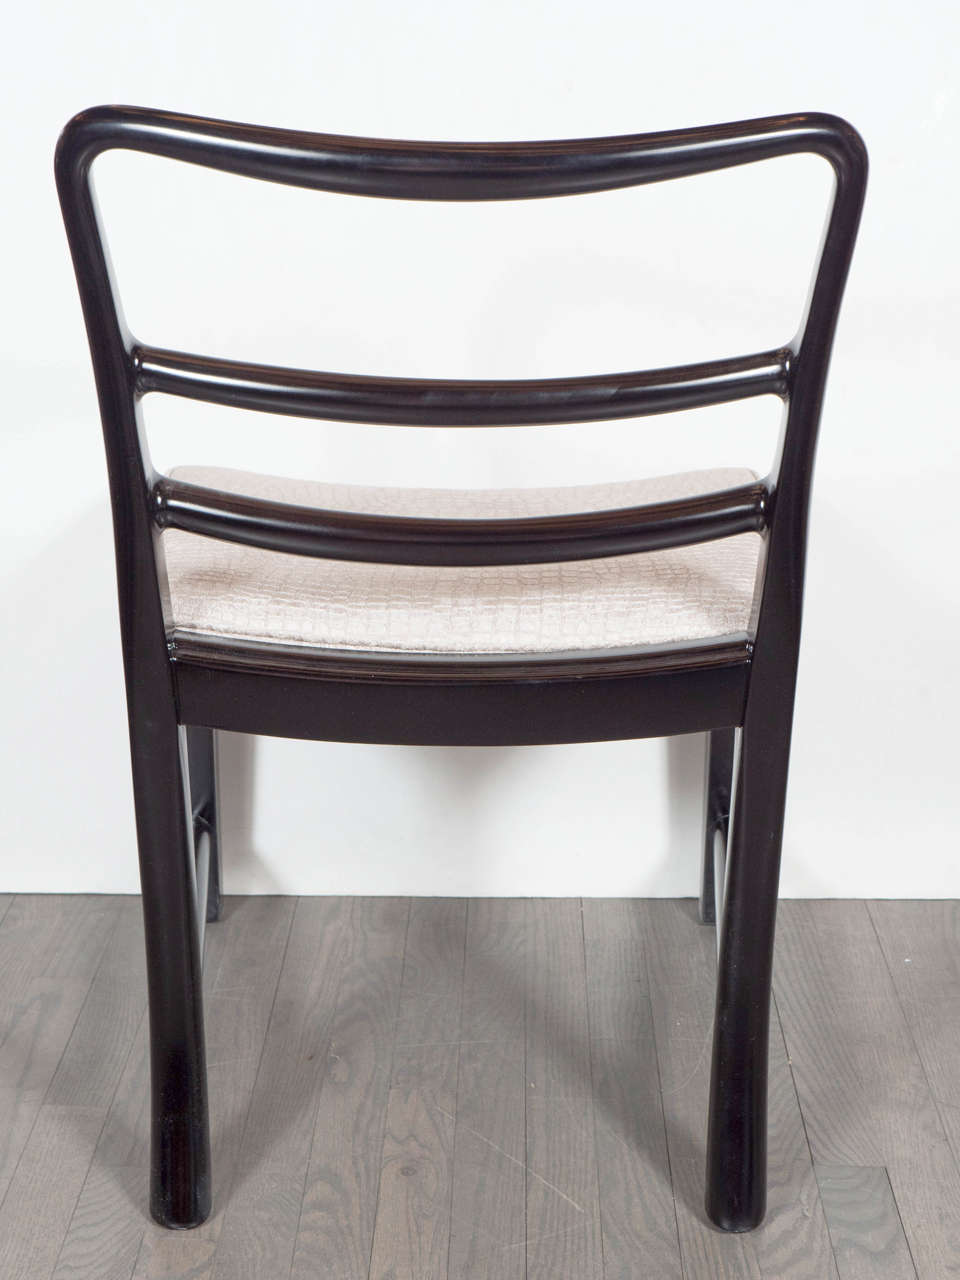 Sculptural Mid-Century Modernist Set of Four Dining Chairs By Dunbar 2